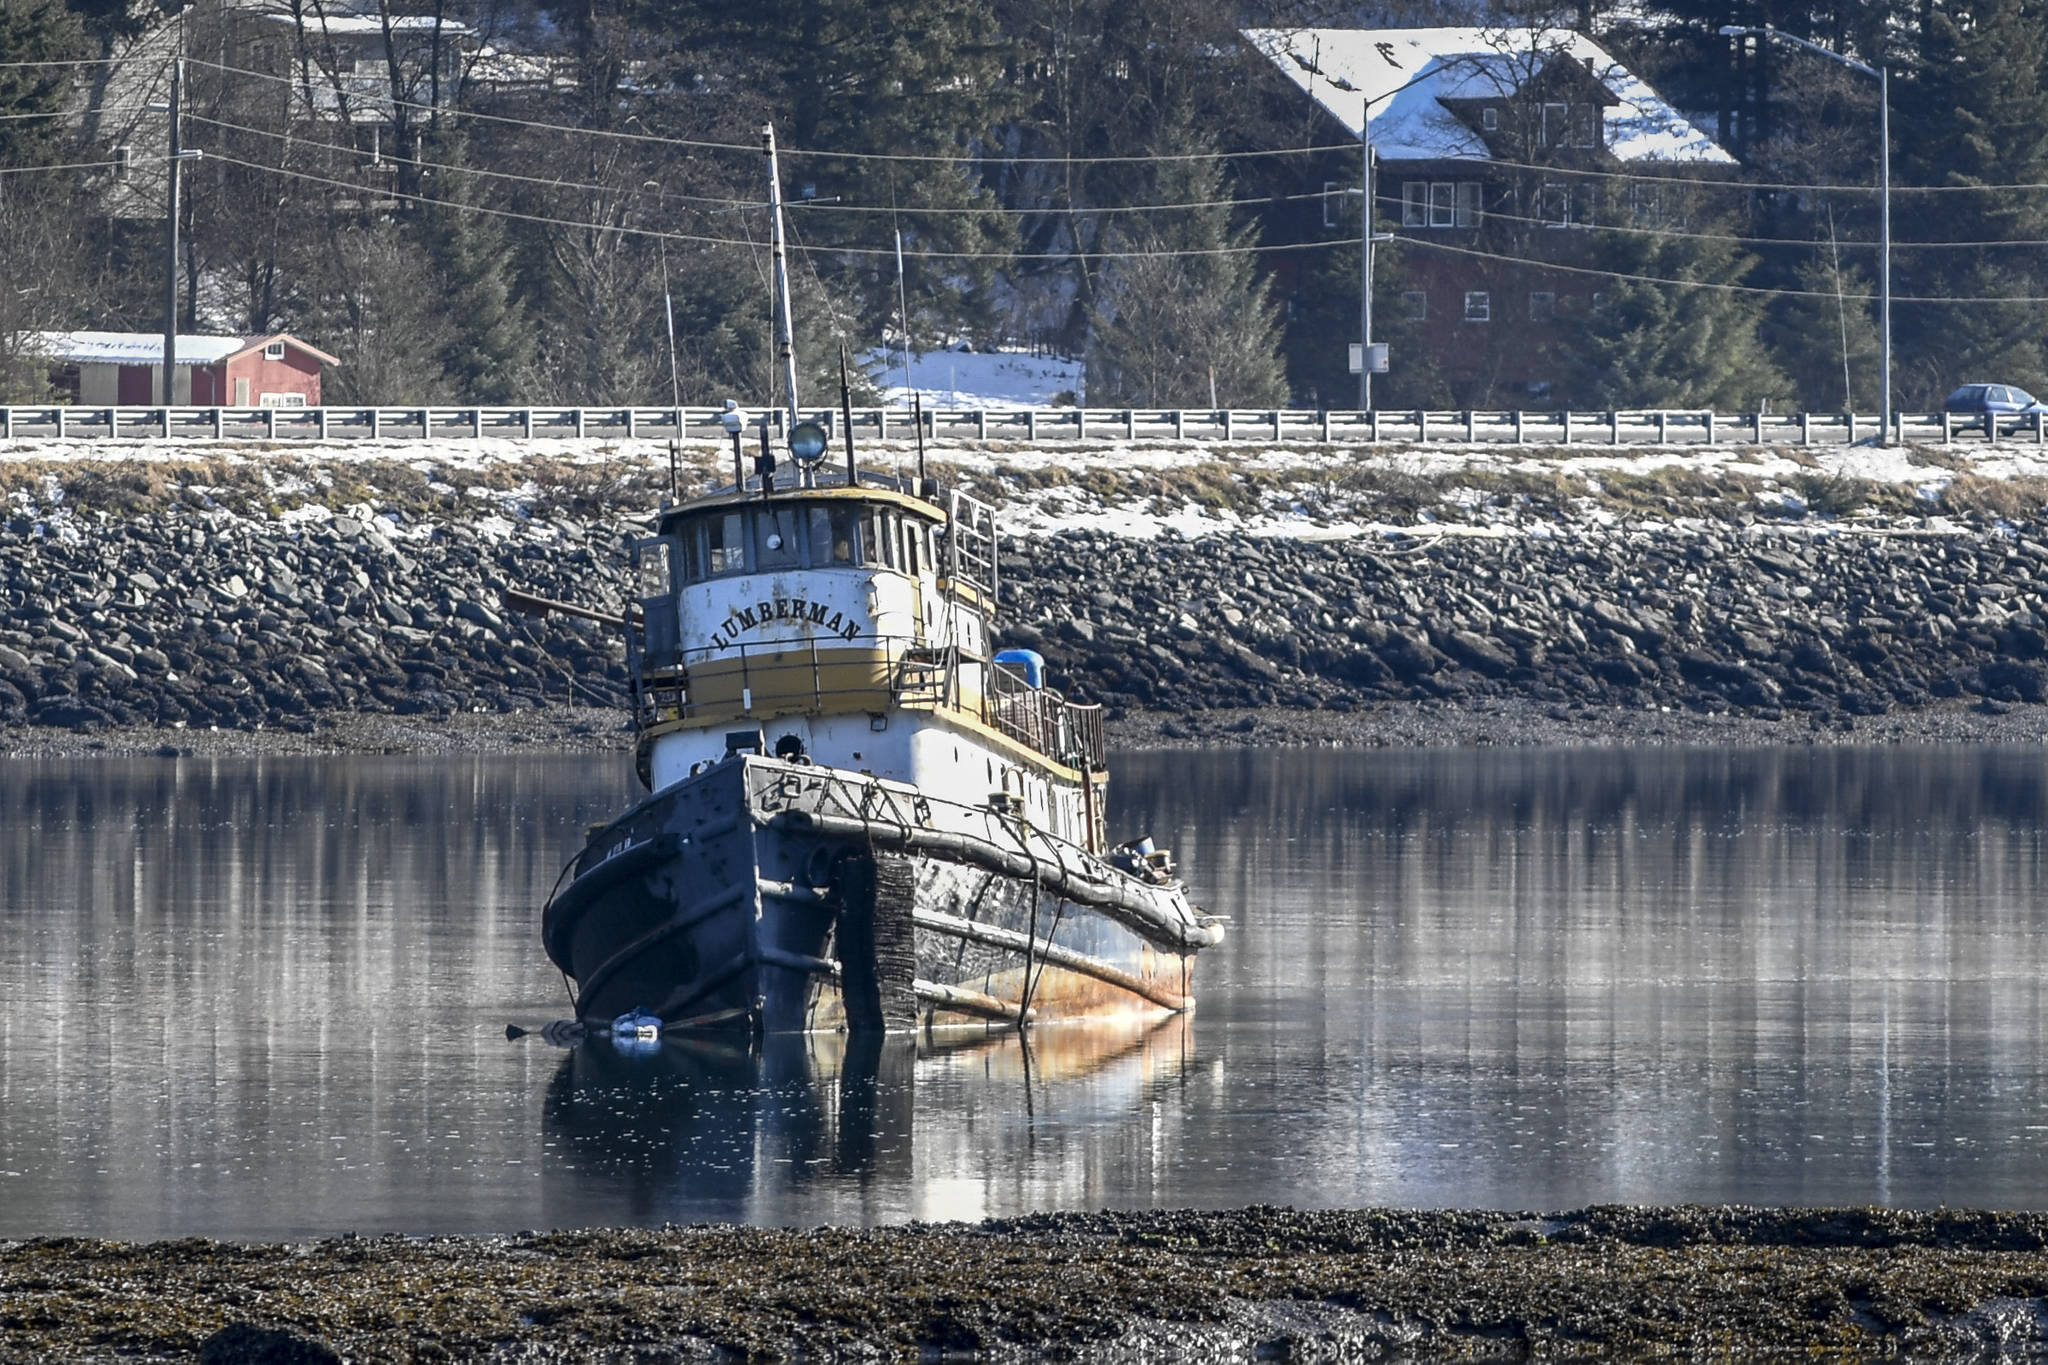 The derelict tug, the Lumberman, at anchor in Gastineau Channel on Tuesday, Feb. 26, 2019. (Michael Penn | Juneau Empire)